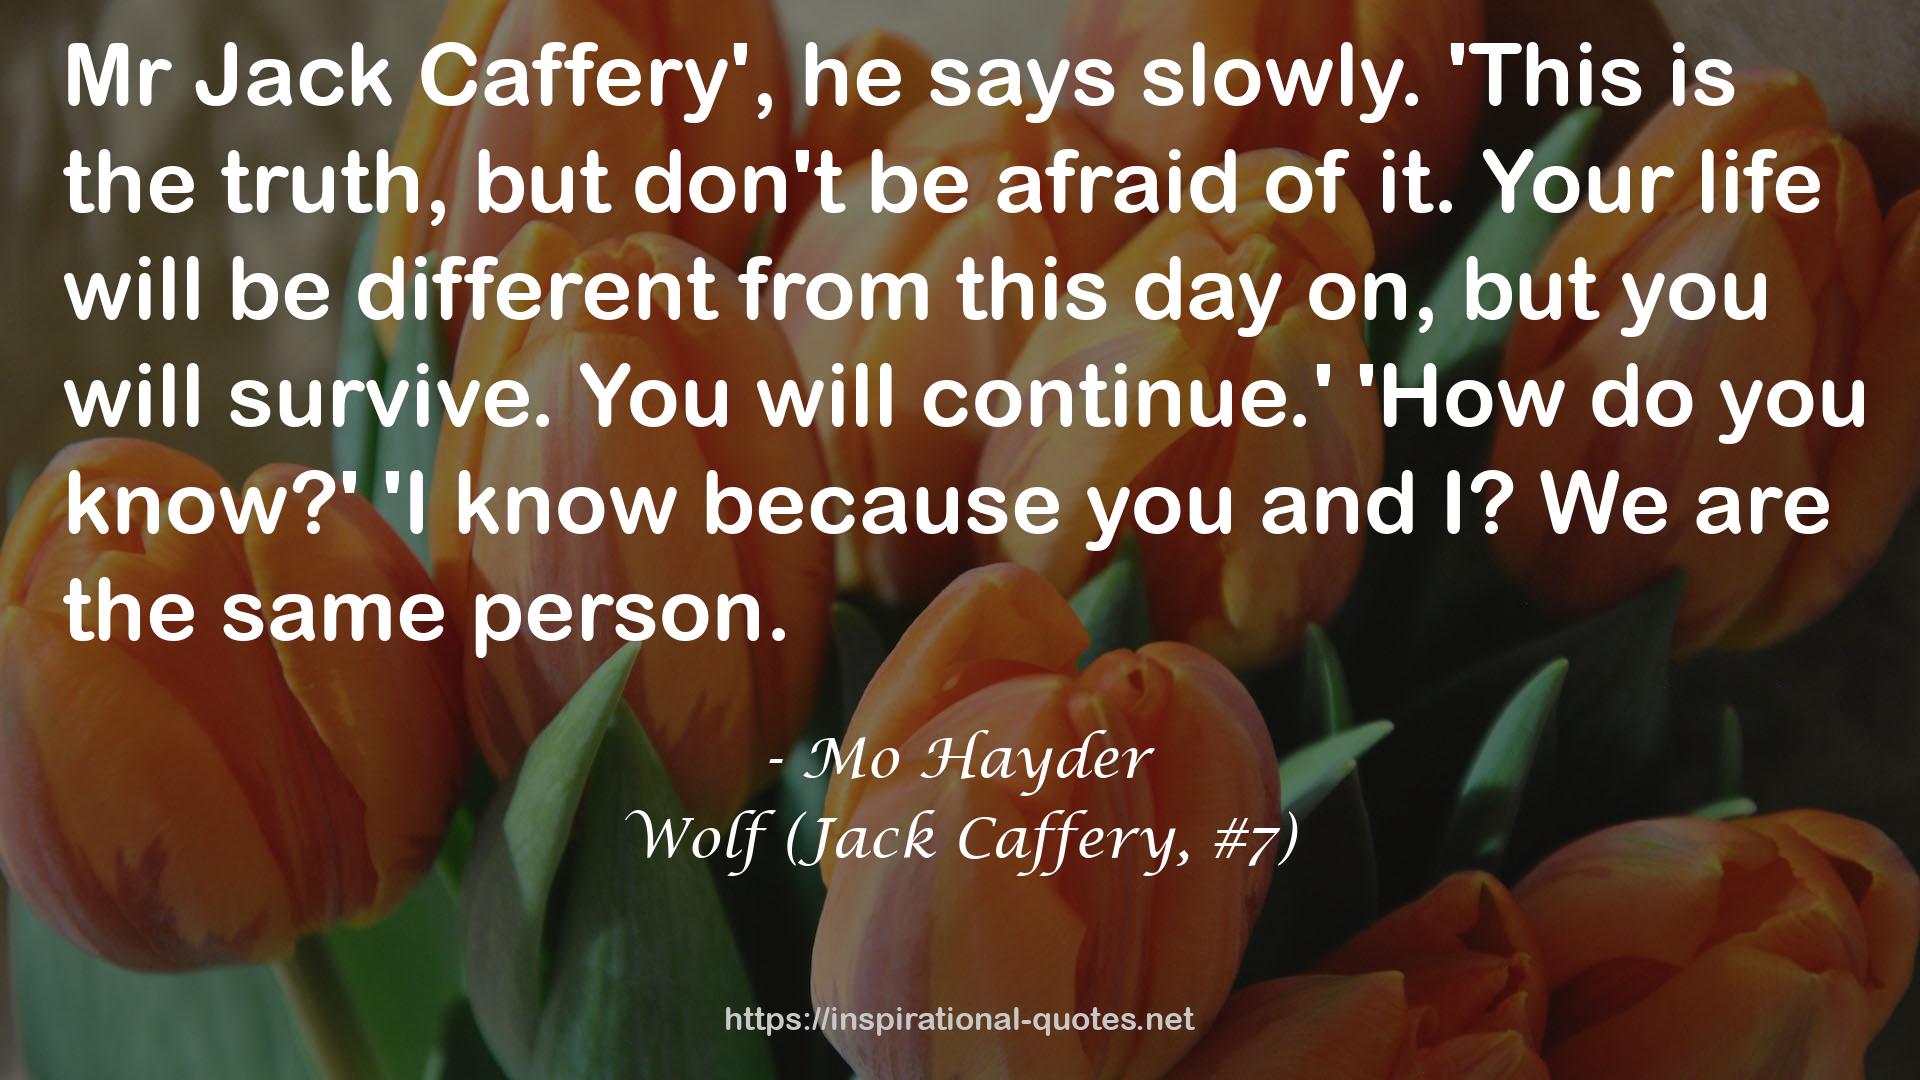 Wolf (Jack Caffery, #7) QUOTES